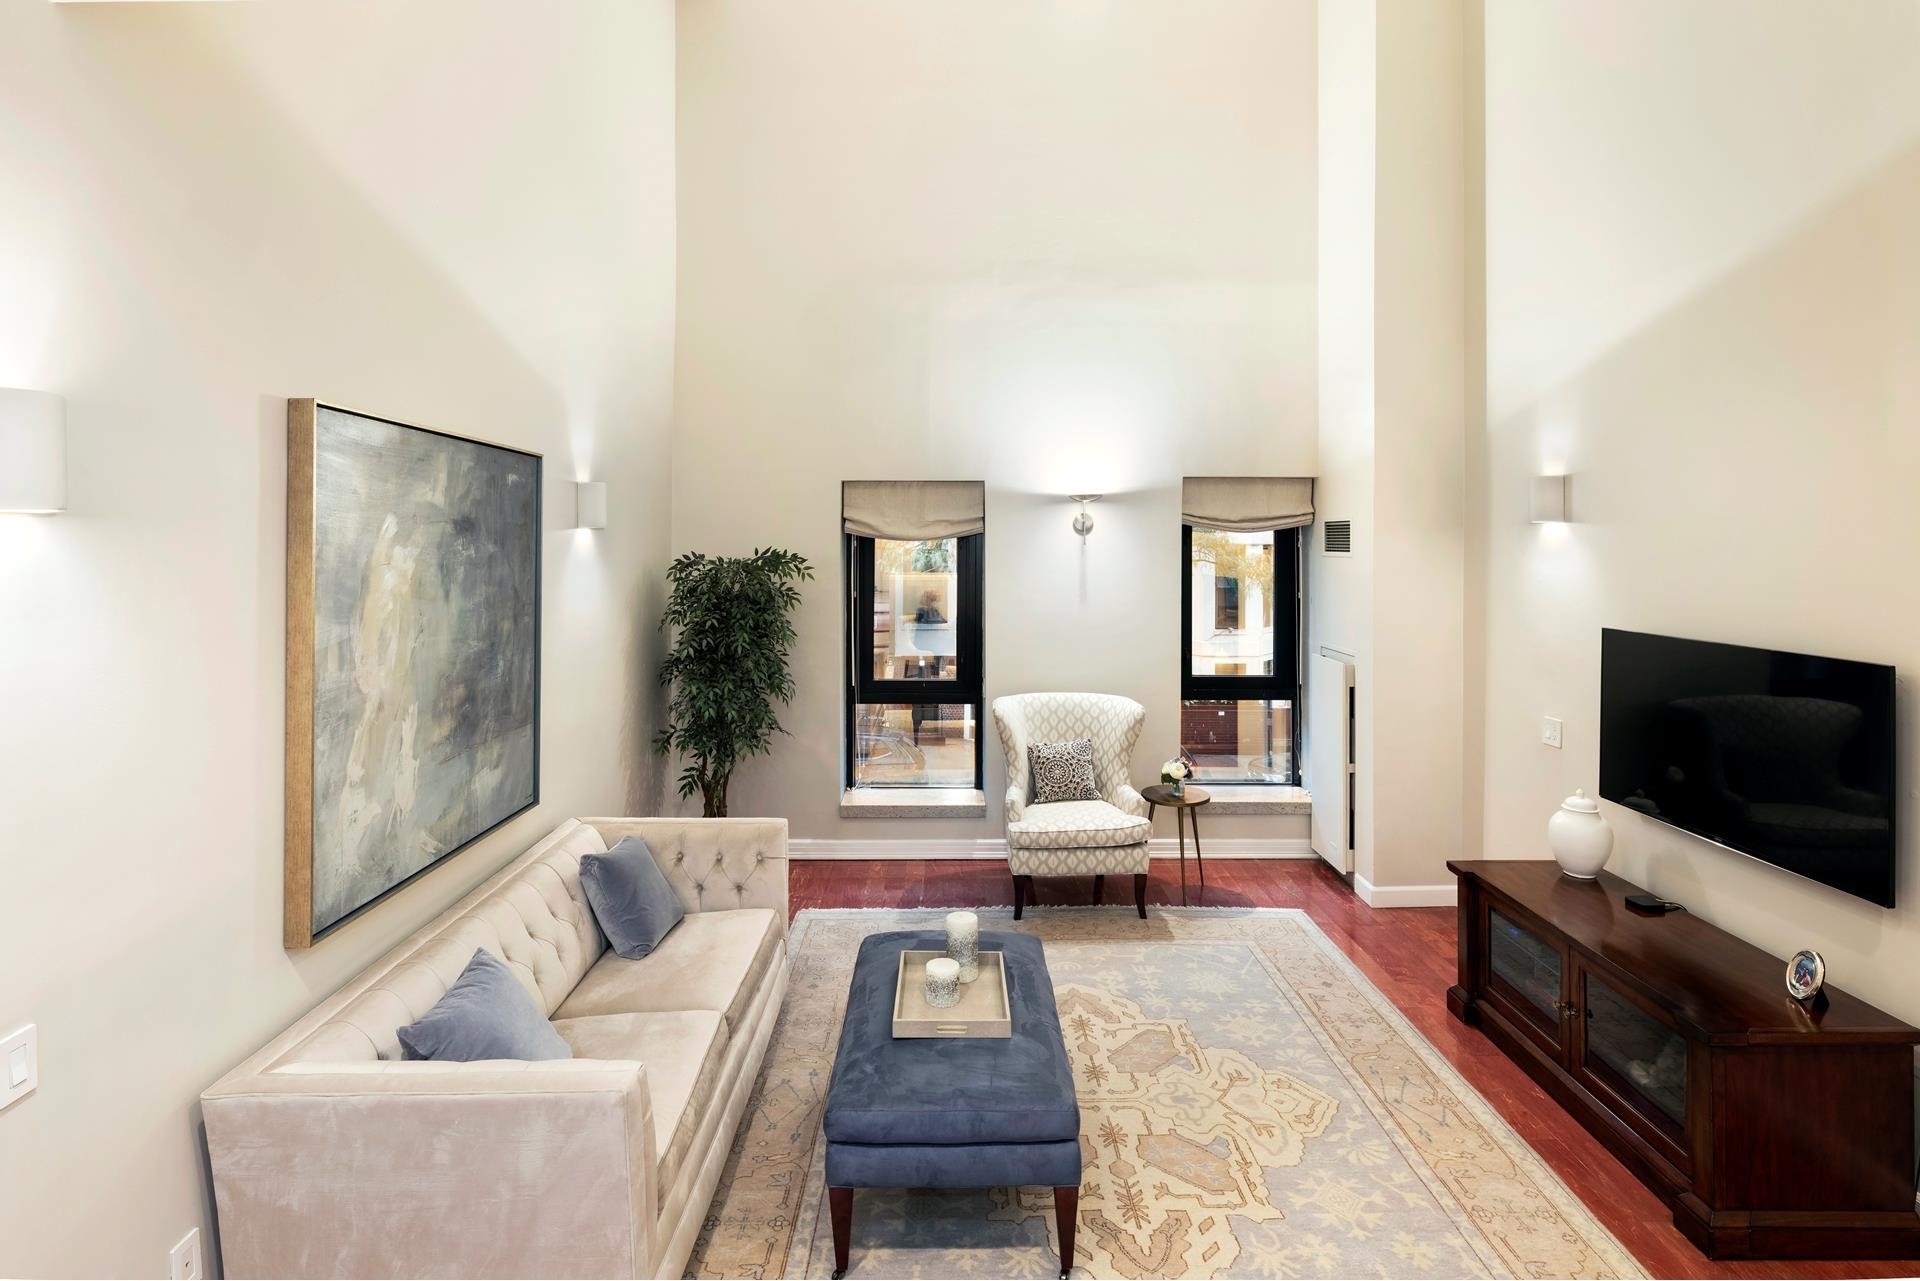 Condominium for Sale at The Pythian, 135 W 70TH ST, 2G Lincoln Square, New York, New York 10023